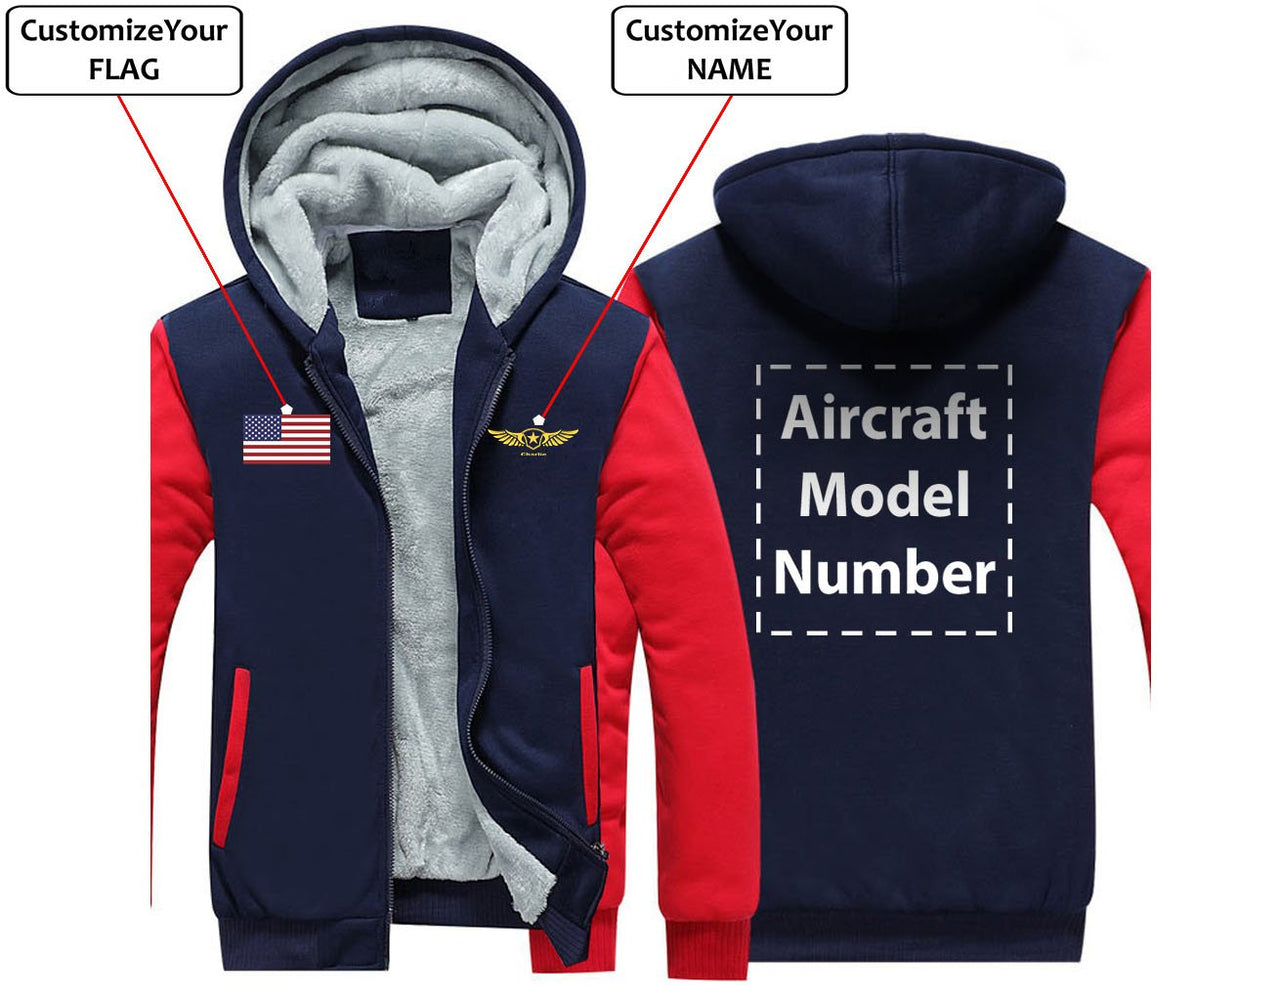 CUSTOM THE FLAG & NAME WITH AIRCRAFT MODEL NUMBER ZIPPER SWEATERS THE AV8R